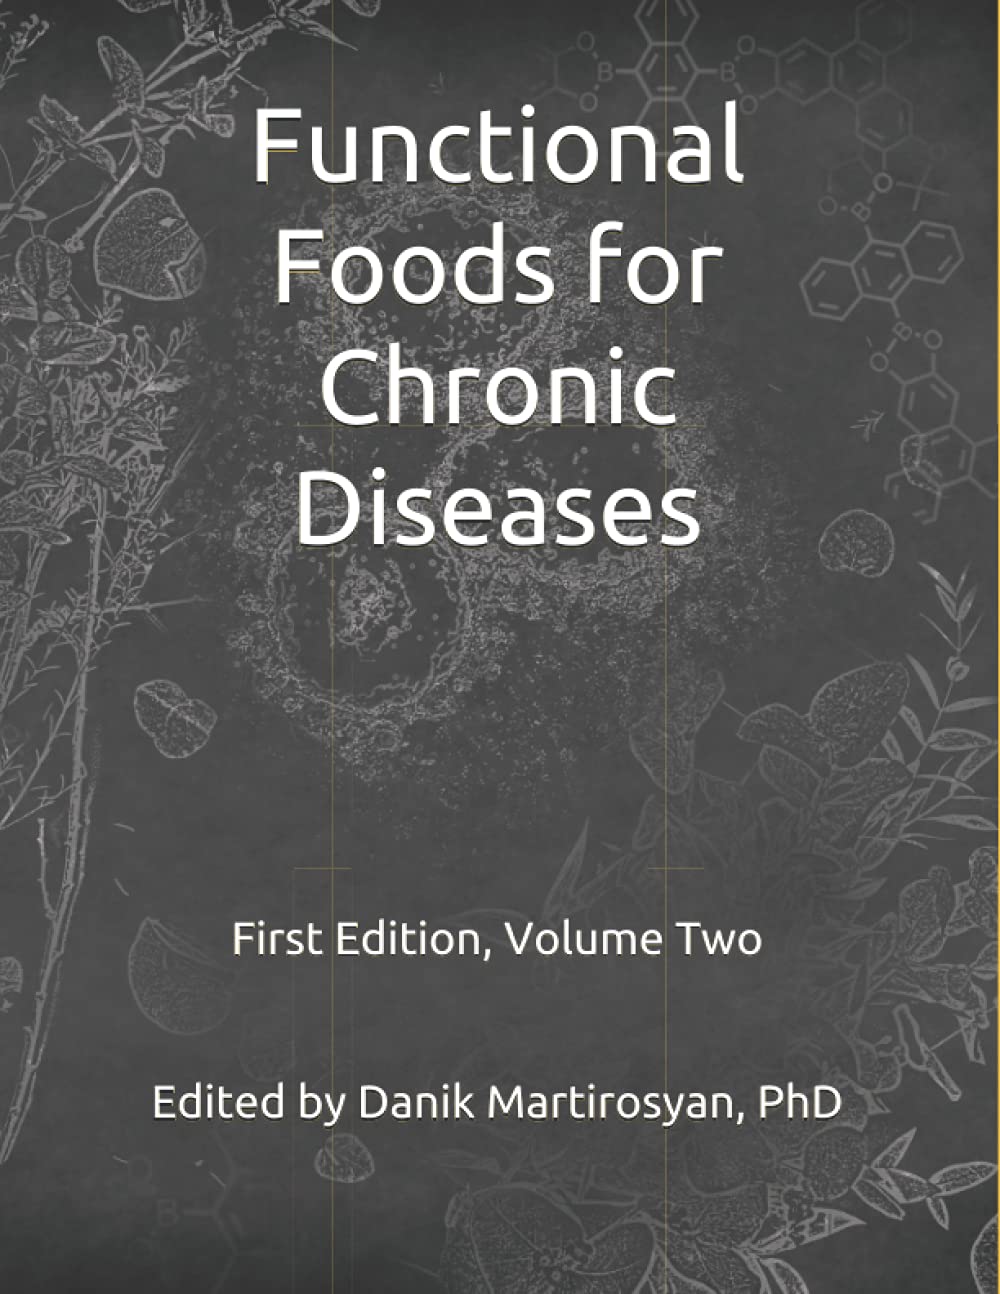 Functional Foods for Chronic Diseases: Textbook, Volume Two, First Edition